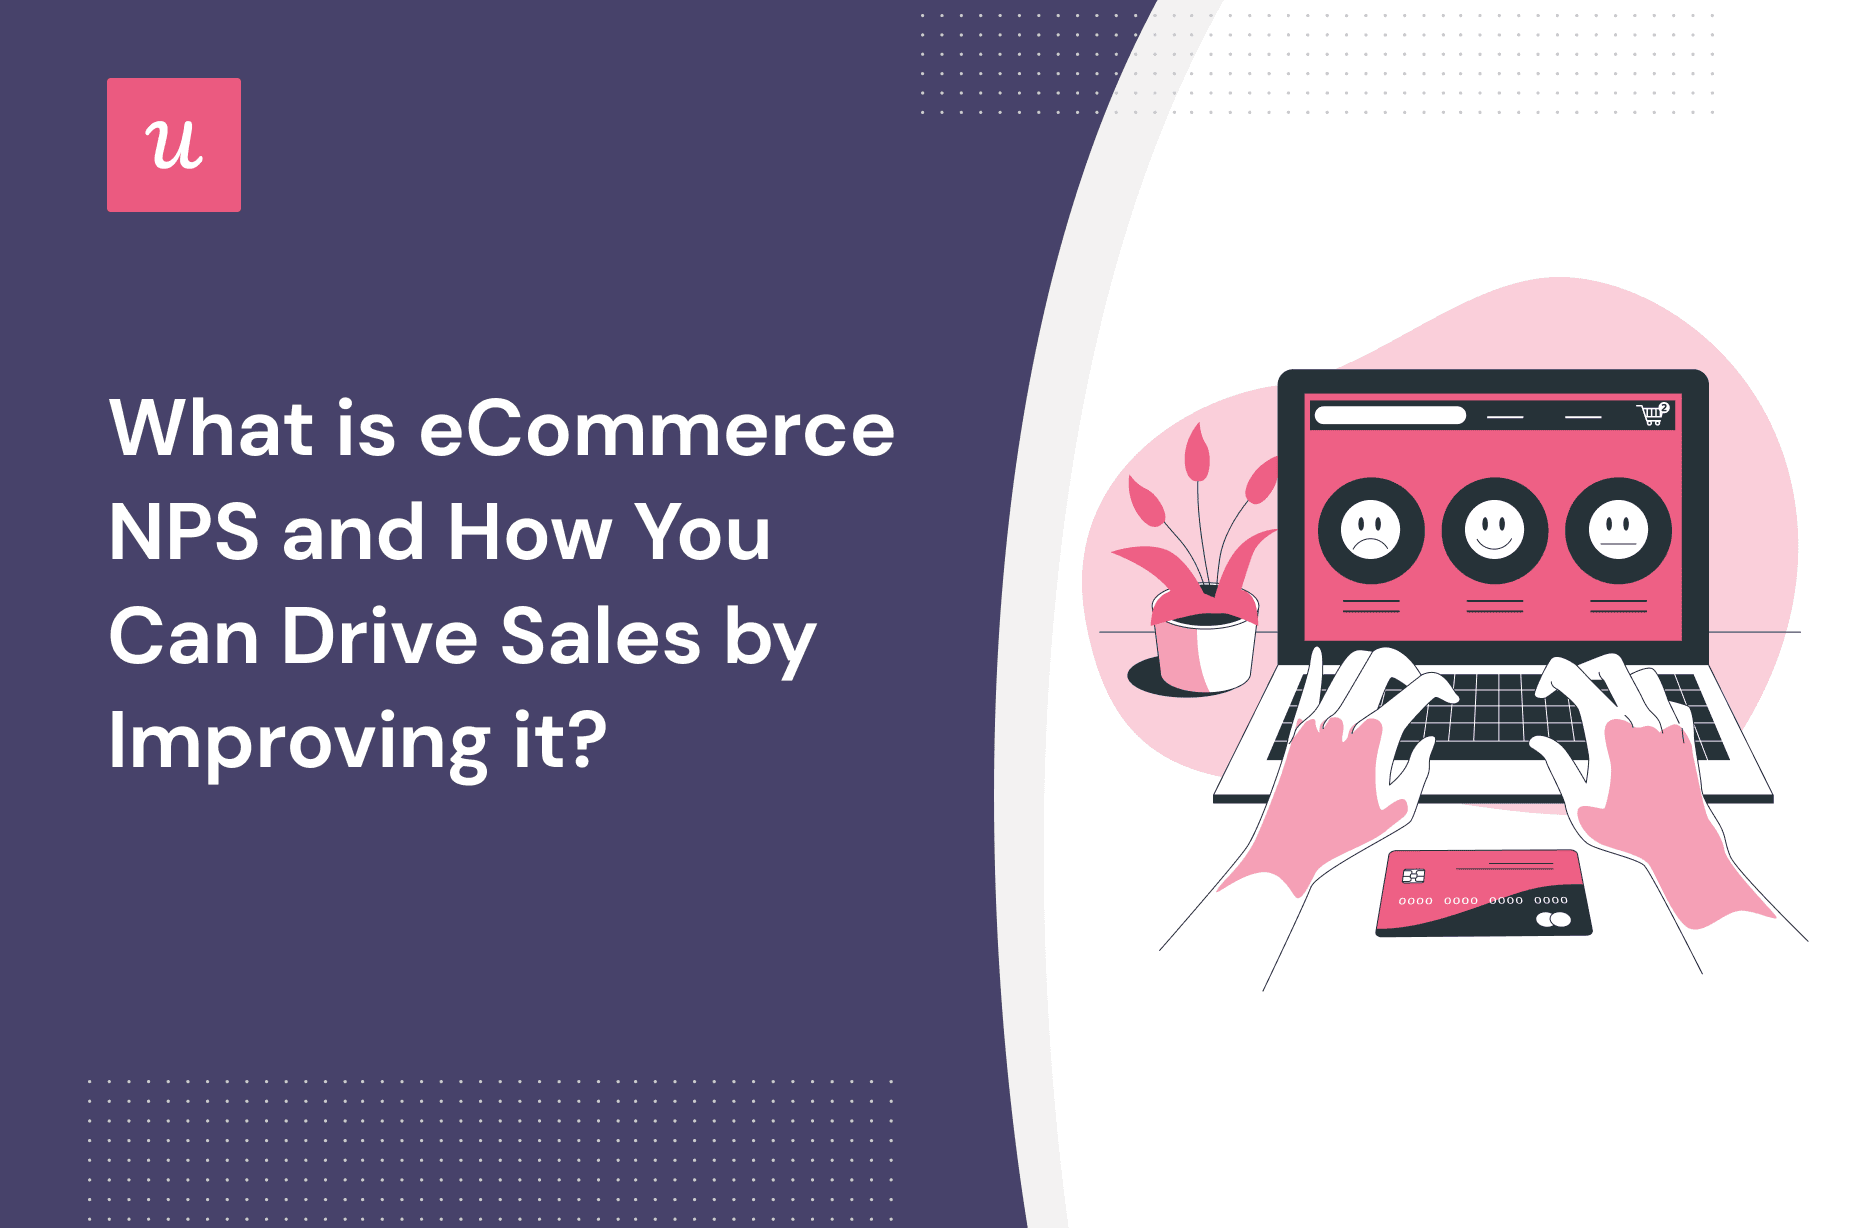 What is eCommerce NPS, and How Can You Drive Sales By Improving It? cover